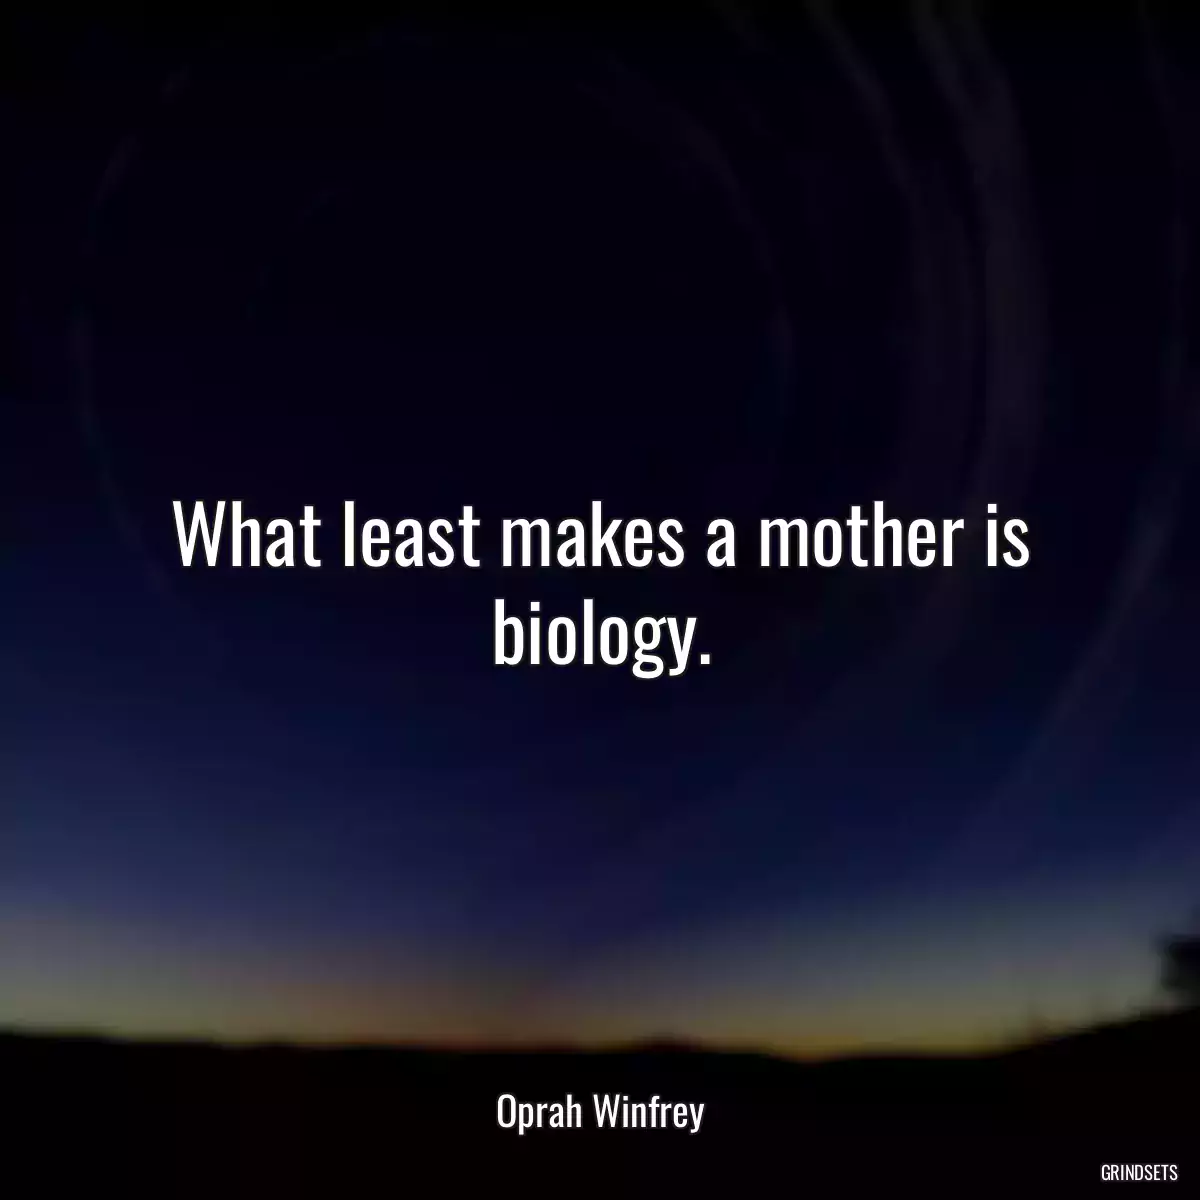 What least makes a mother is biology.